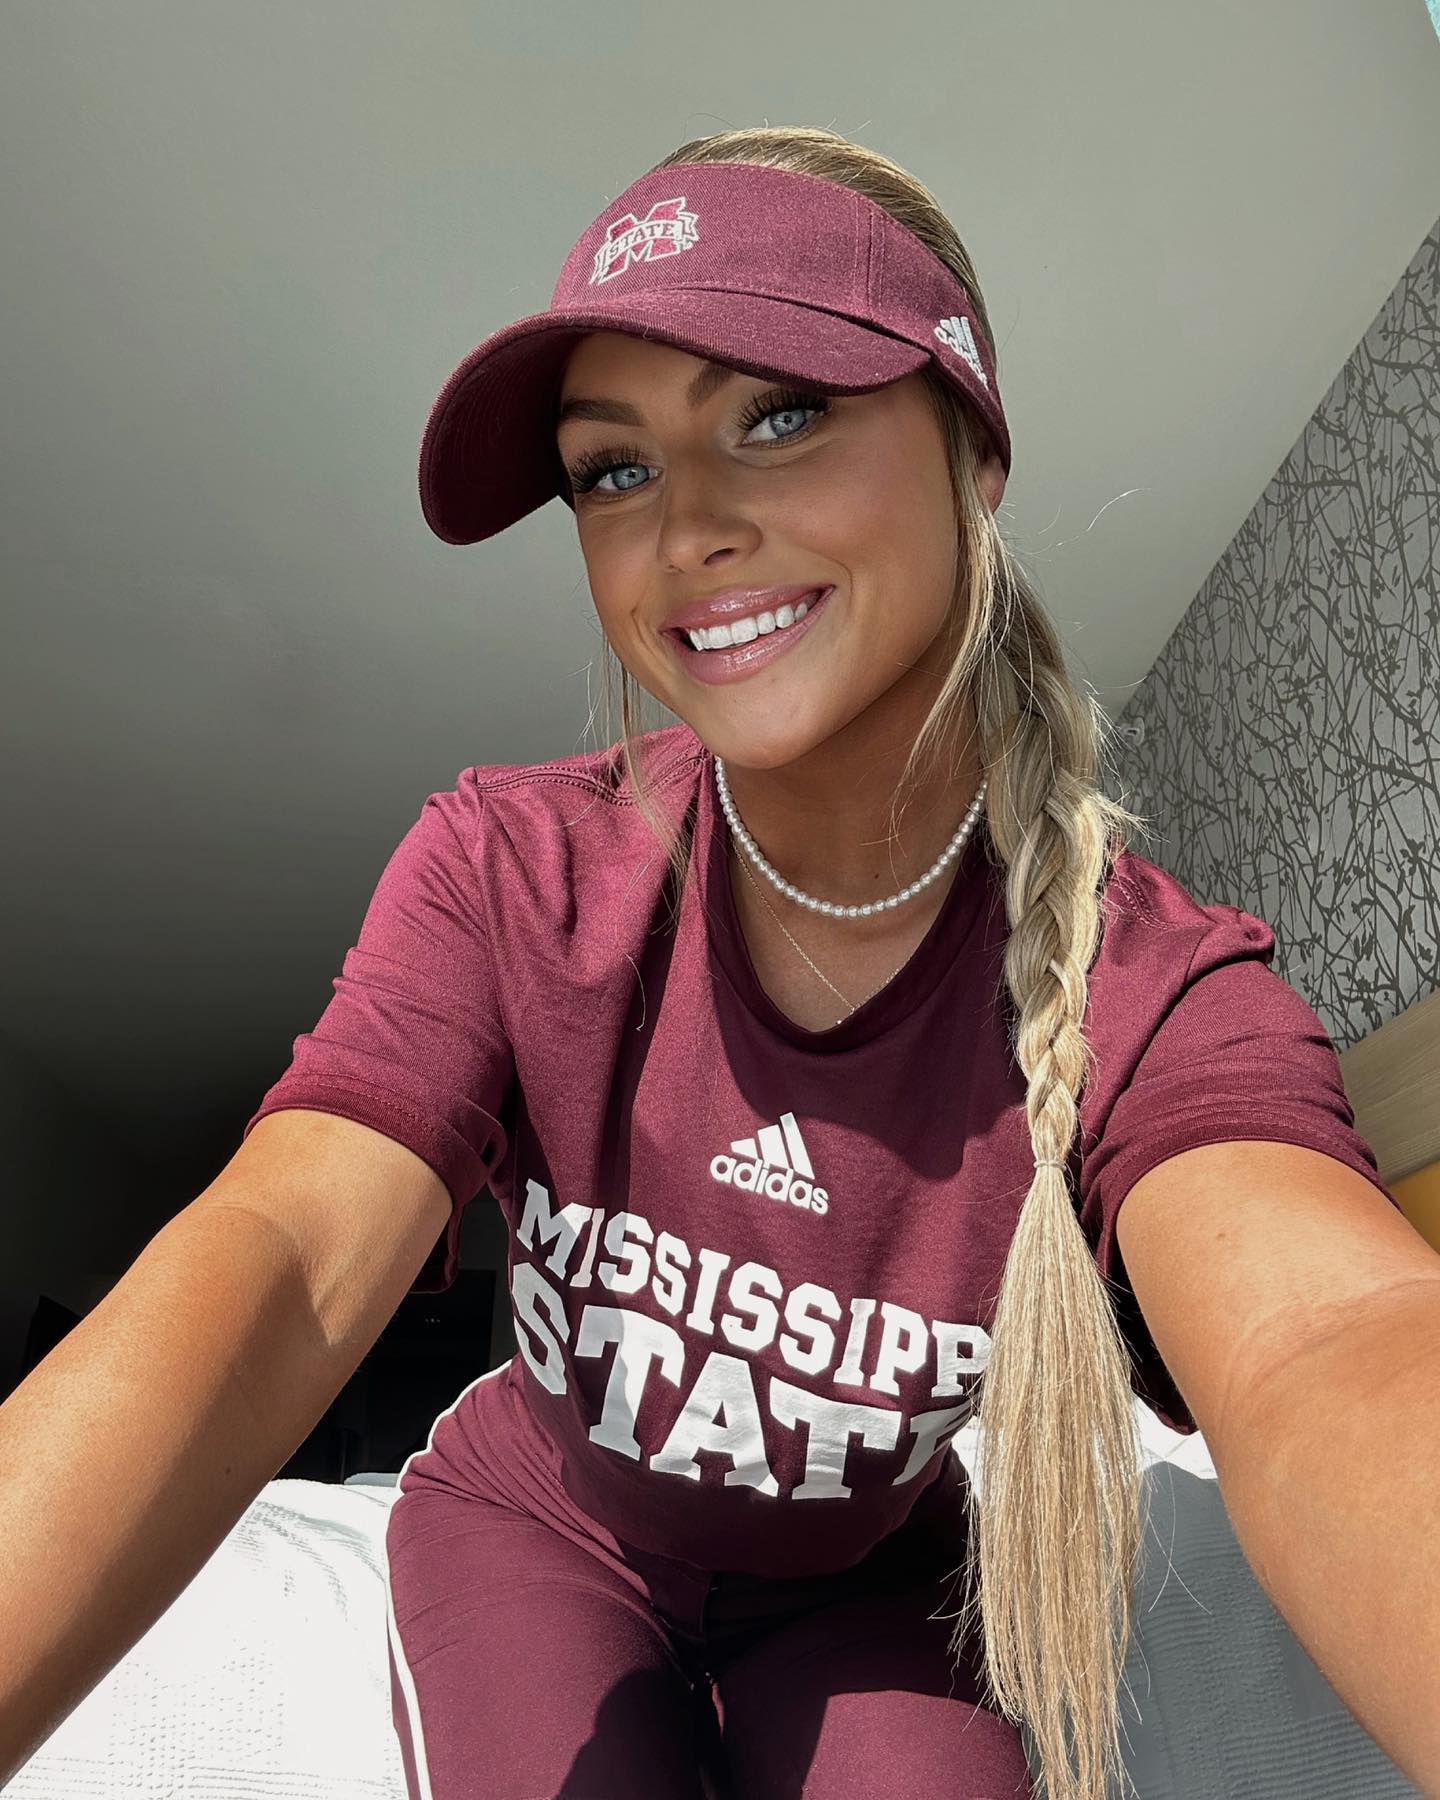 The softball star is currently a senior at Mississippi State